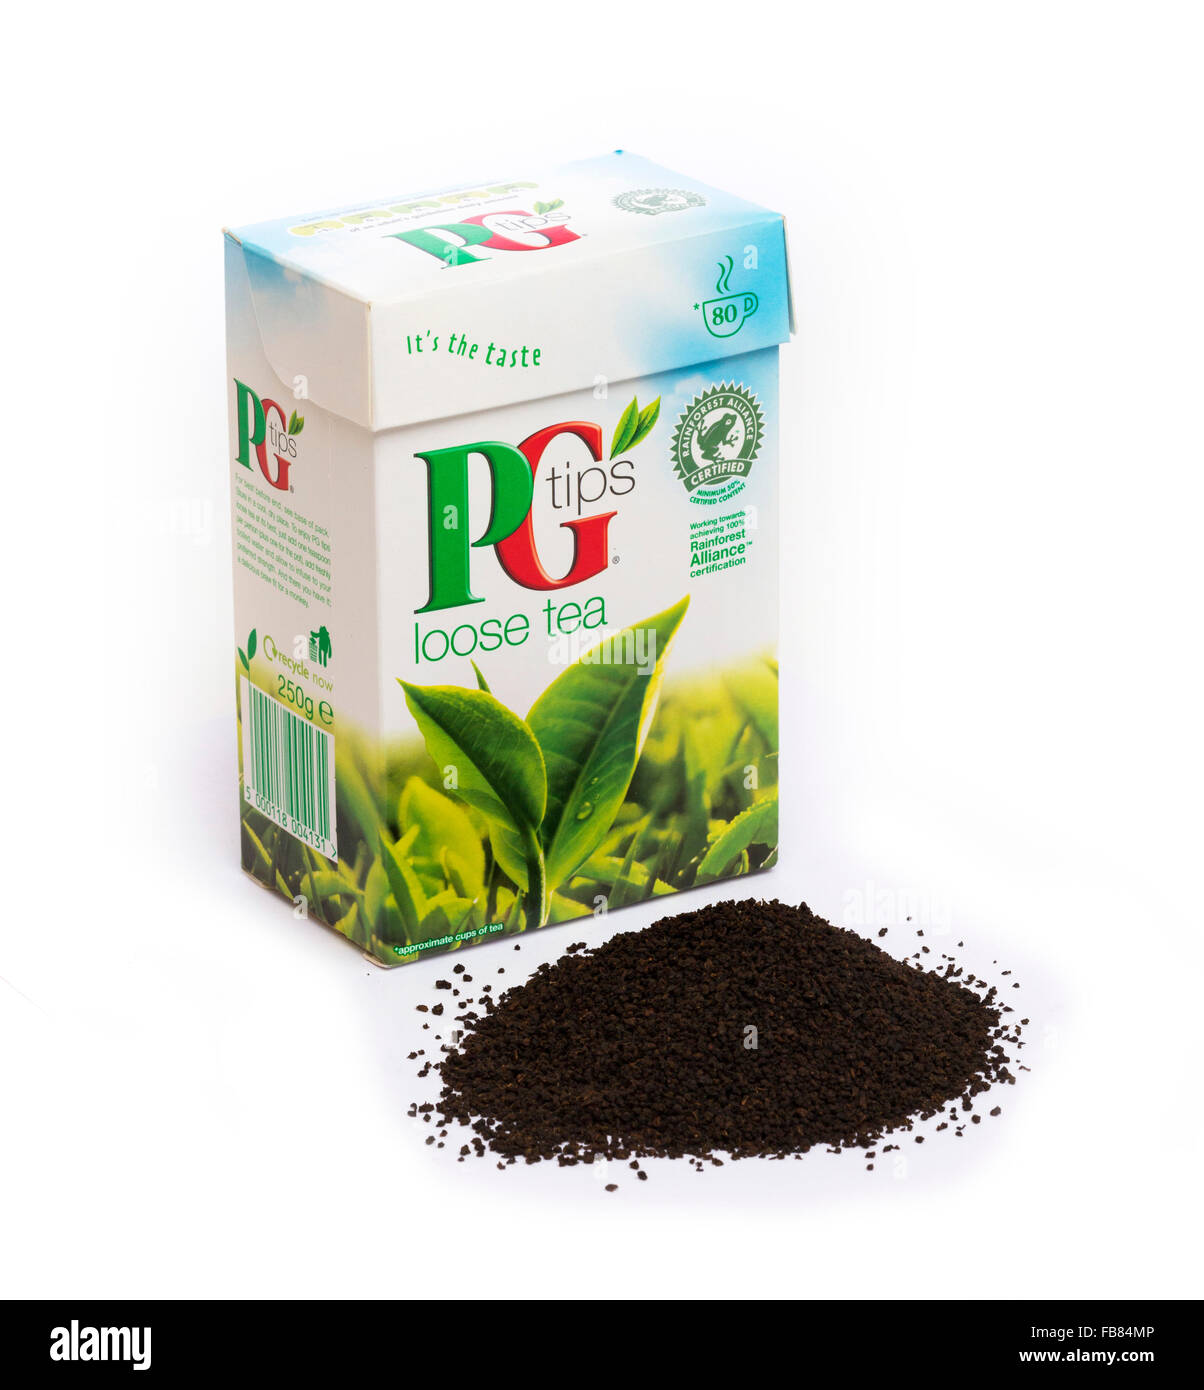 PG Tips loose tea made by Unilever Stock Photo